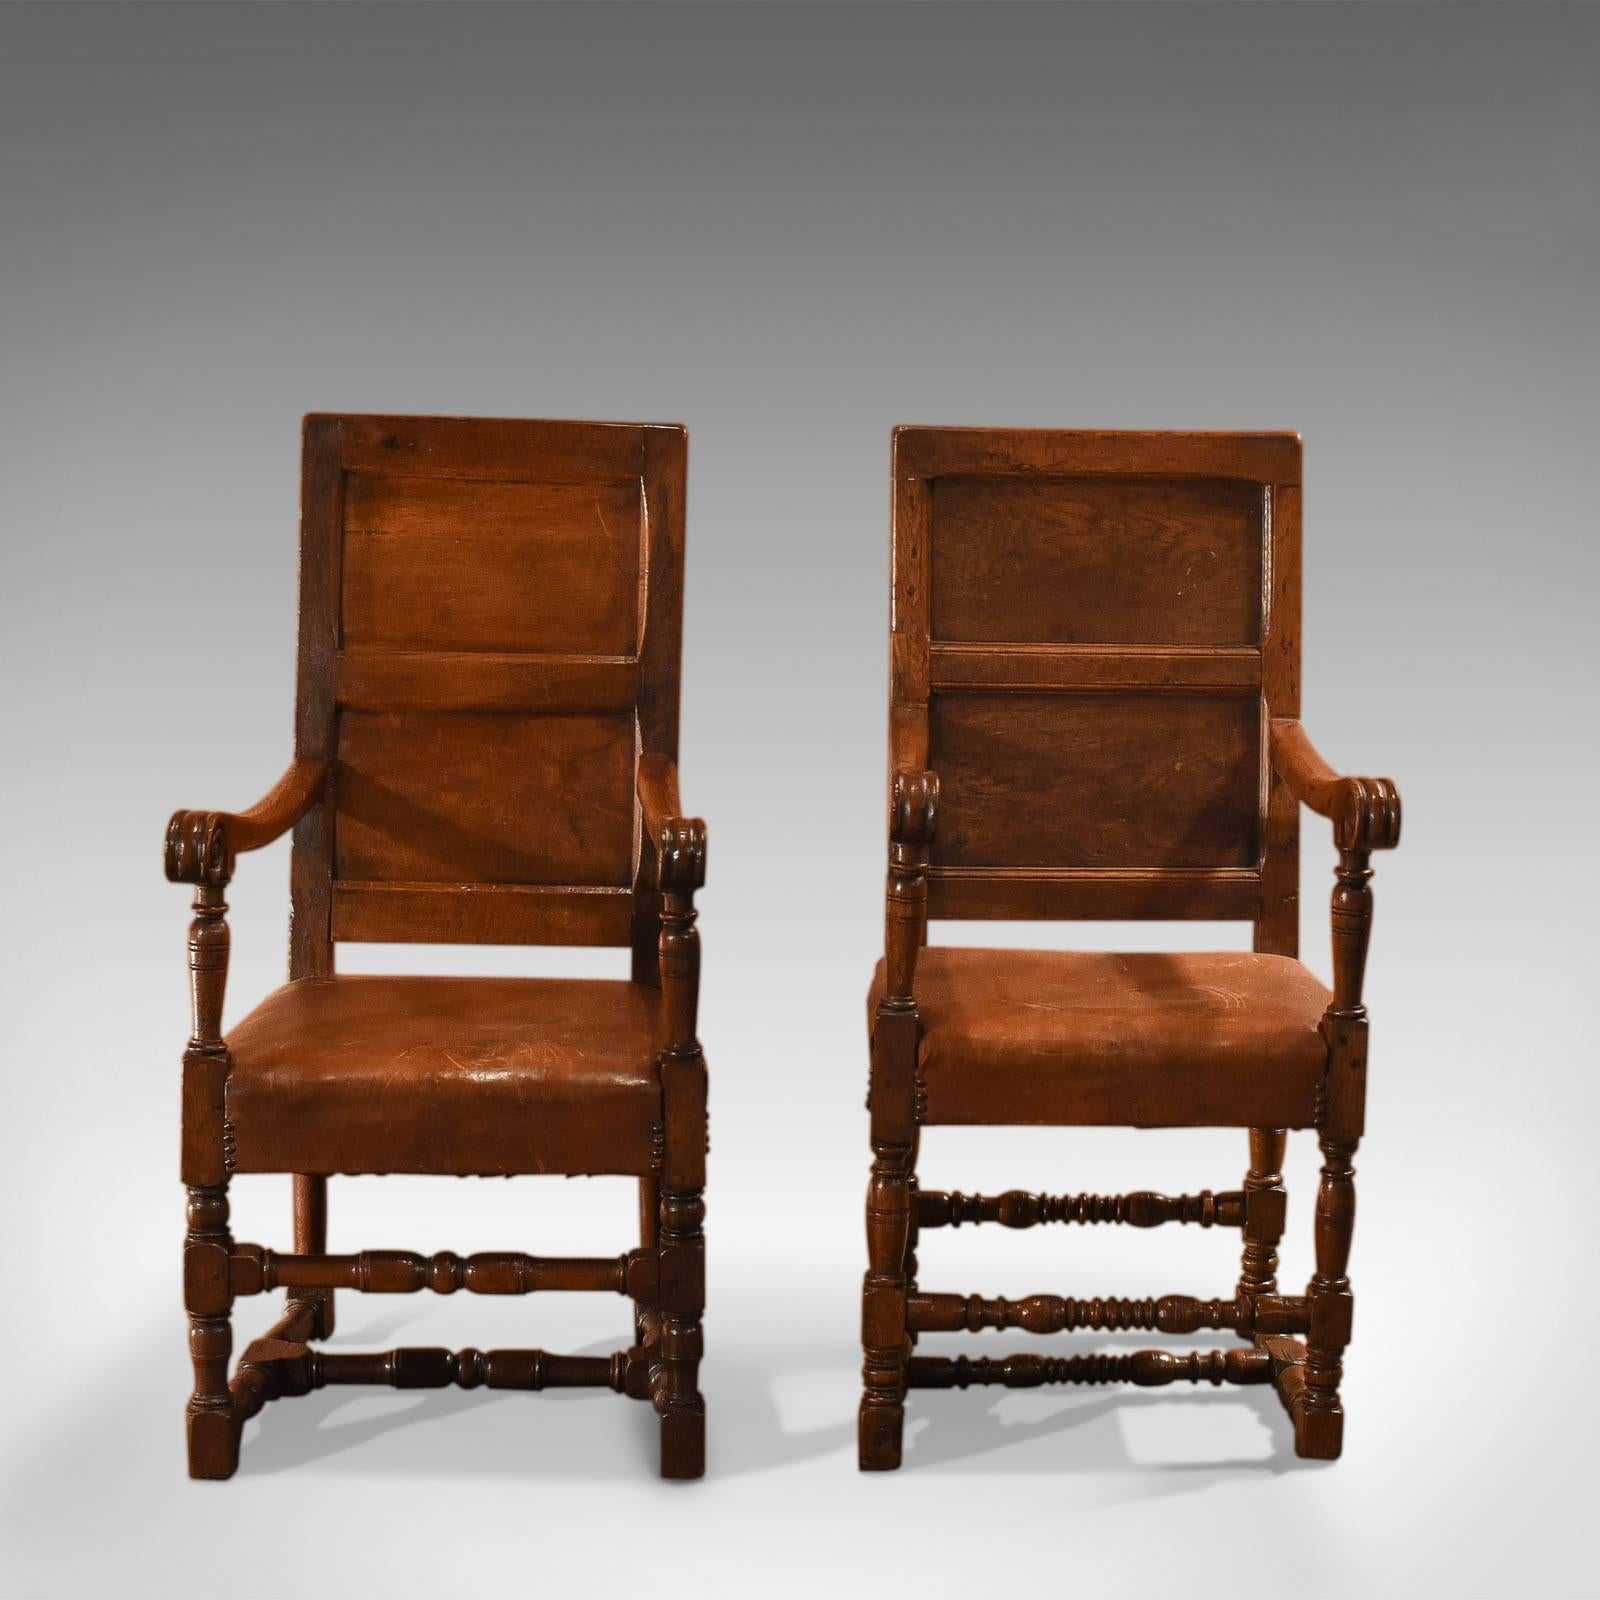 This is a pair of similar antique, 18th century and later panel back armchairs.

The aged English oak carries a warmth and deep lustrous shine. Raised on turned legs united by ring turned stretchers the shaped arms terminate in scrolled ends,